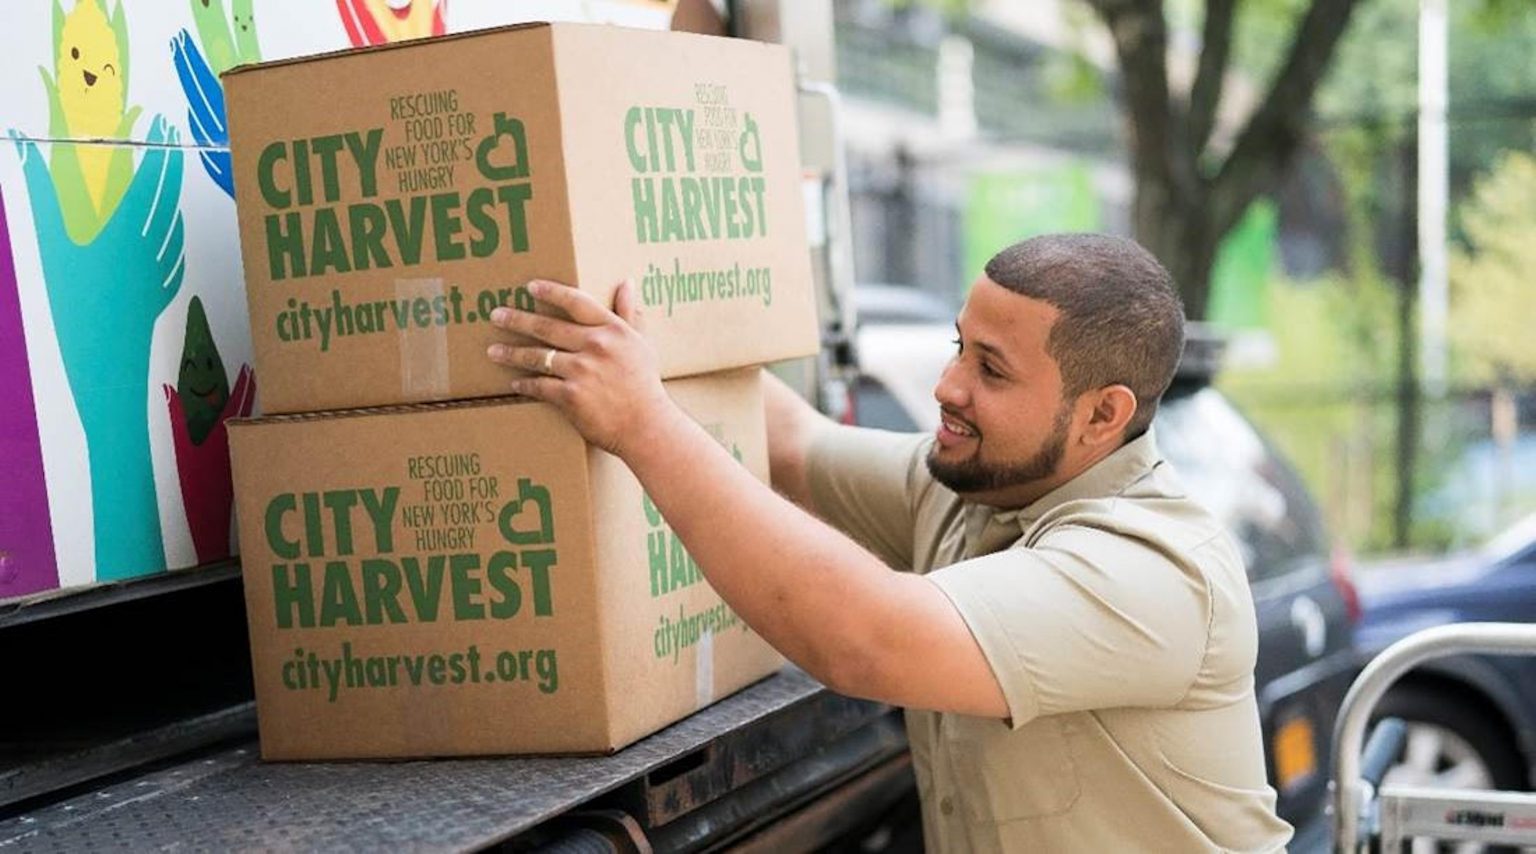 City Harvest delivered 56 million pounds of food throughout city during